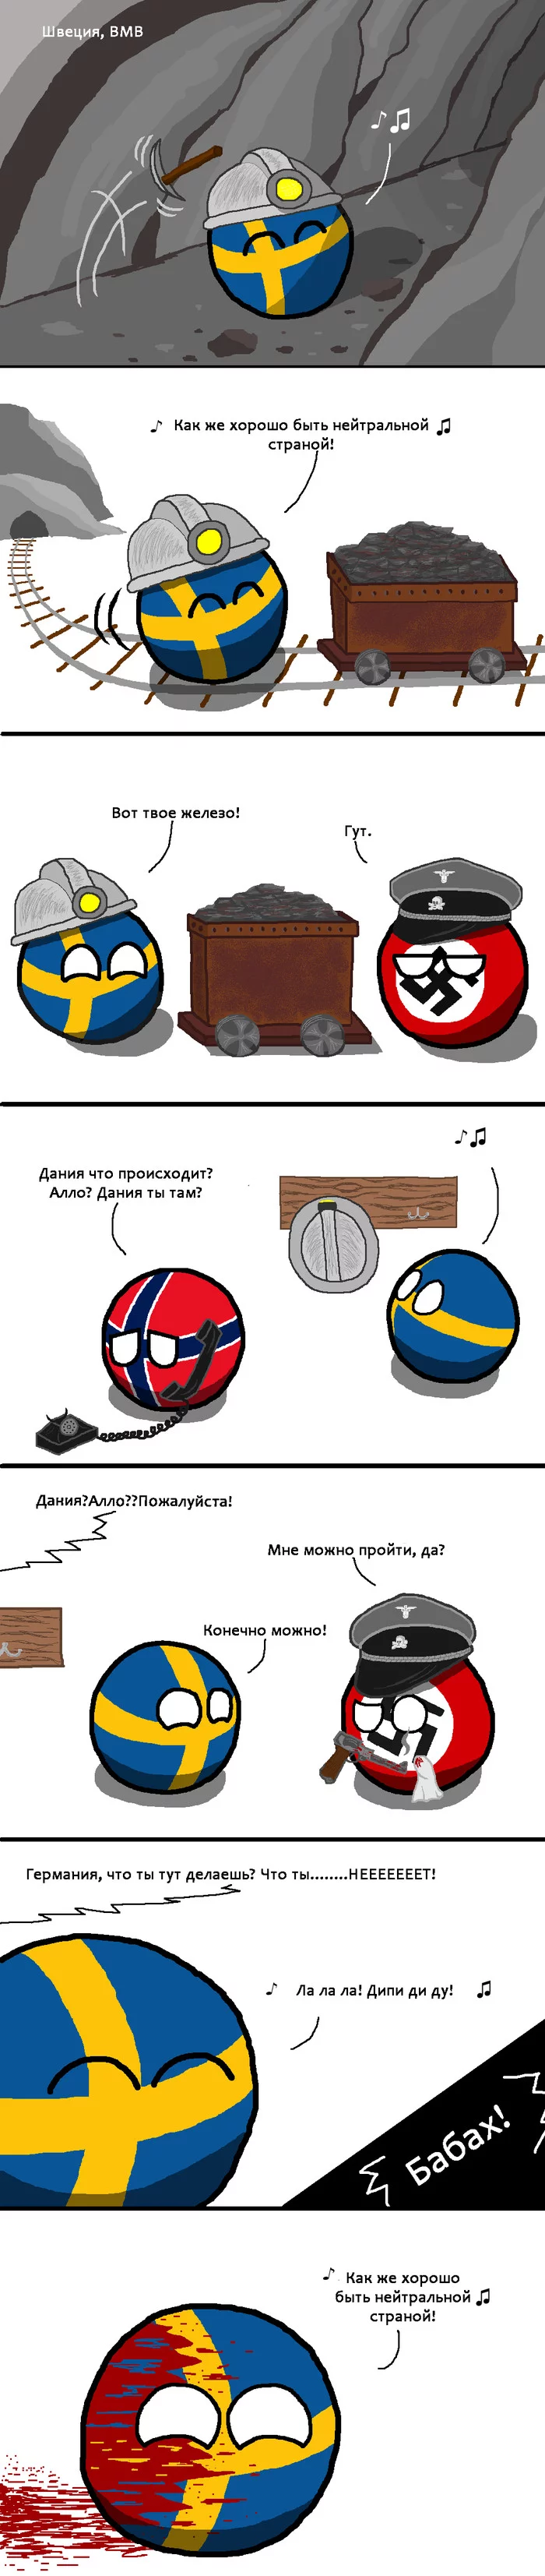 Neutrality at its finest - Countryballs, Translated by myself, Comics, Sweden, Germany, Norway, Neutrality, Longpost, Politics